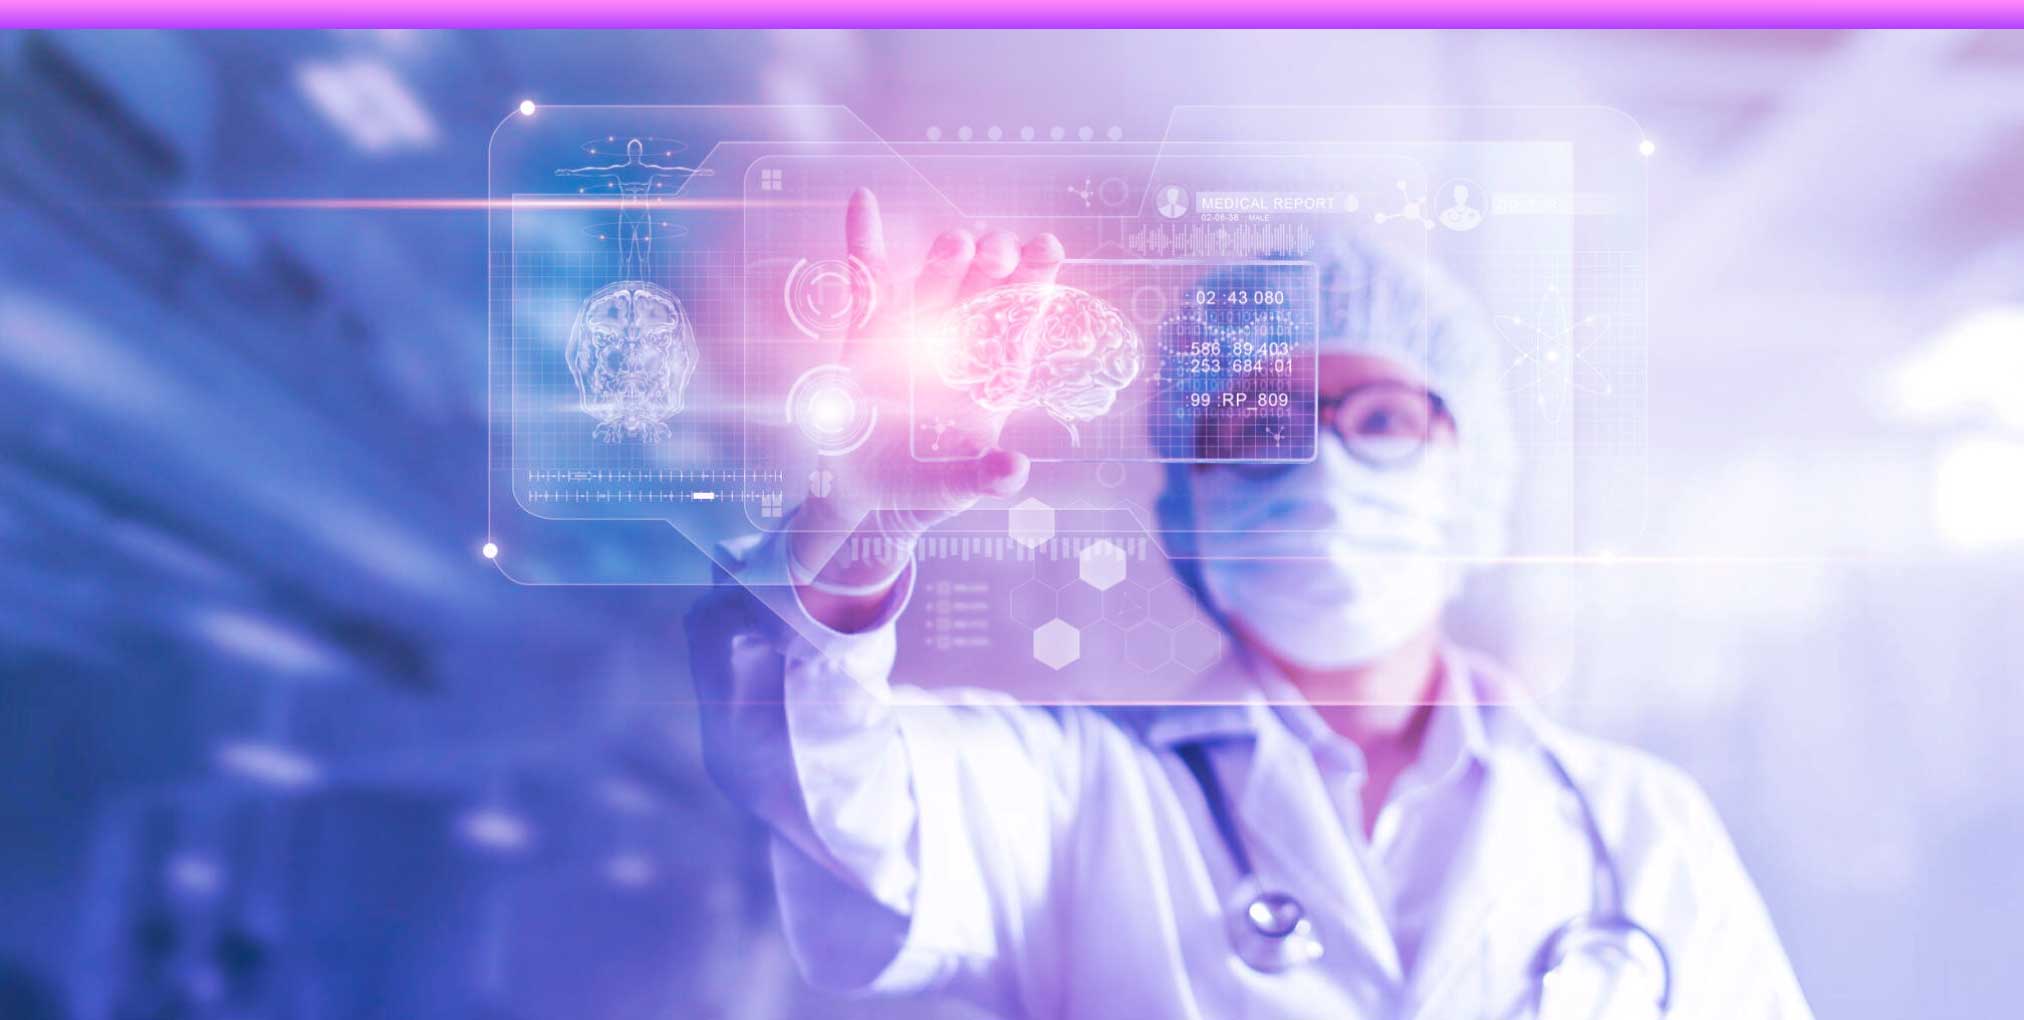 BioEMR Enhance Clinical Decision Making with AI